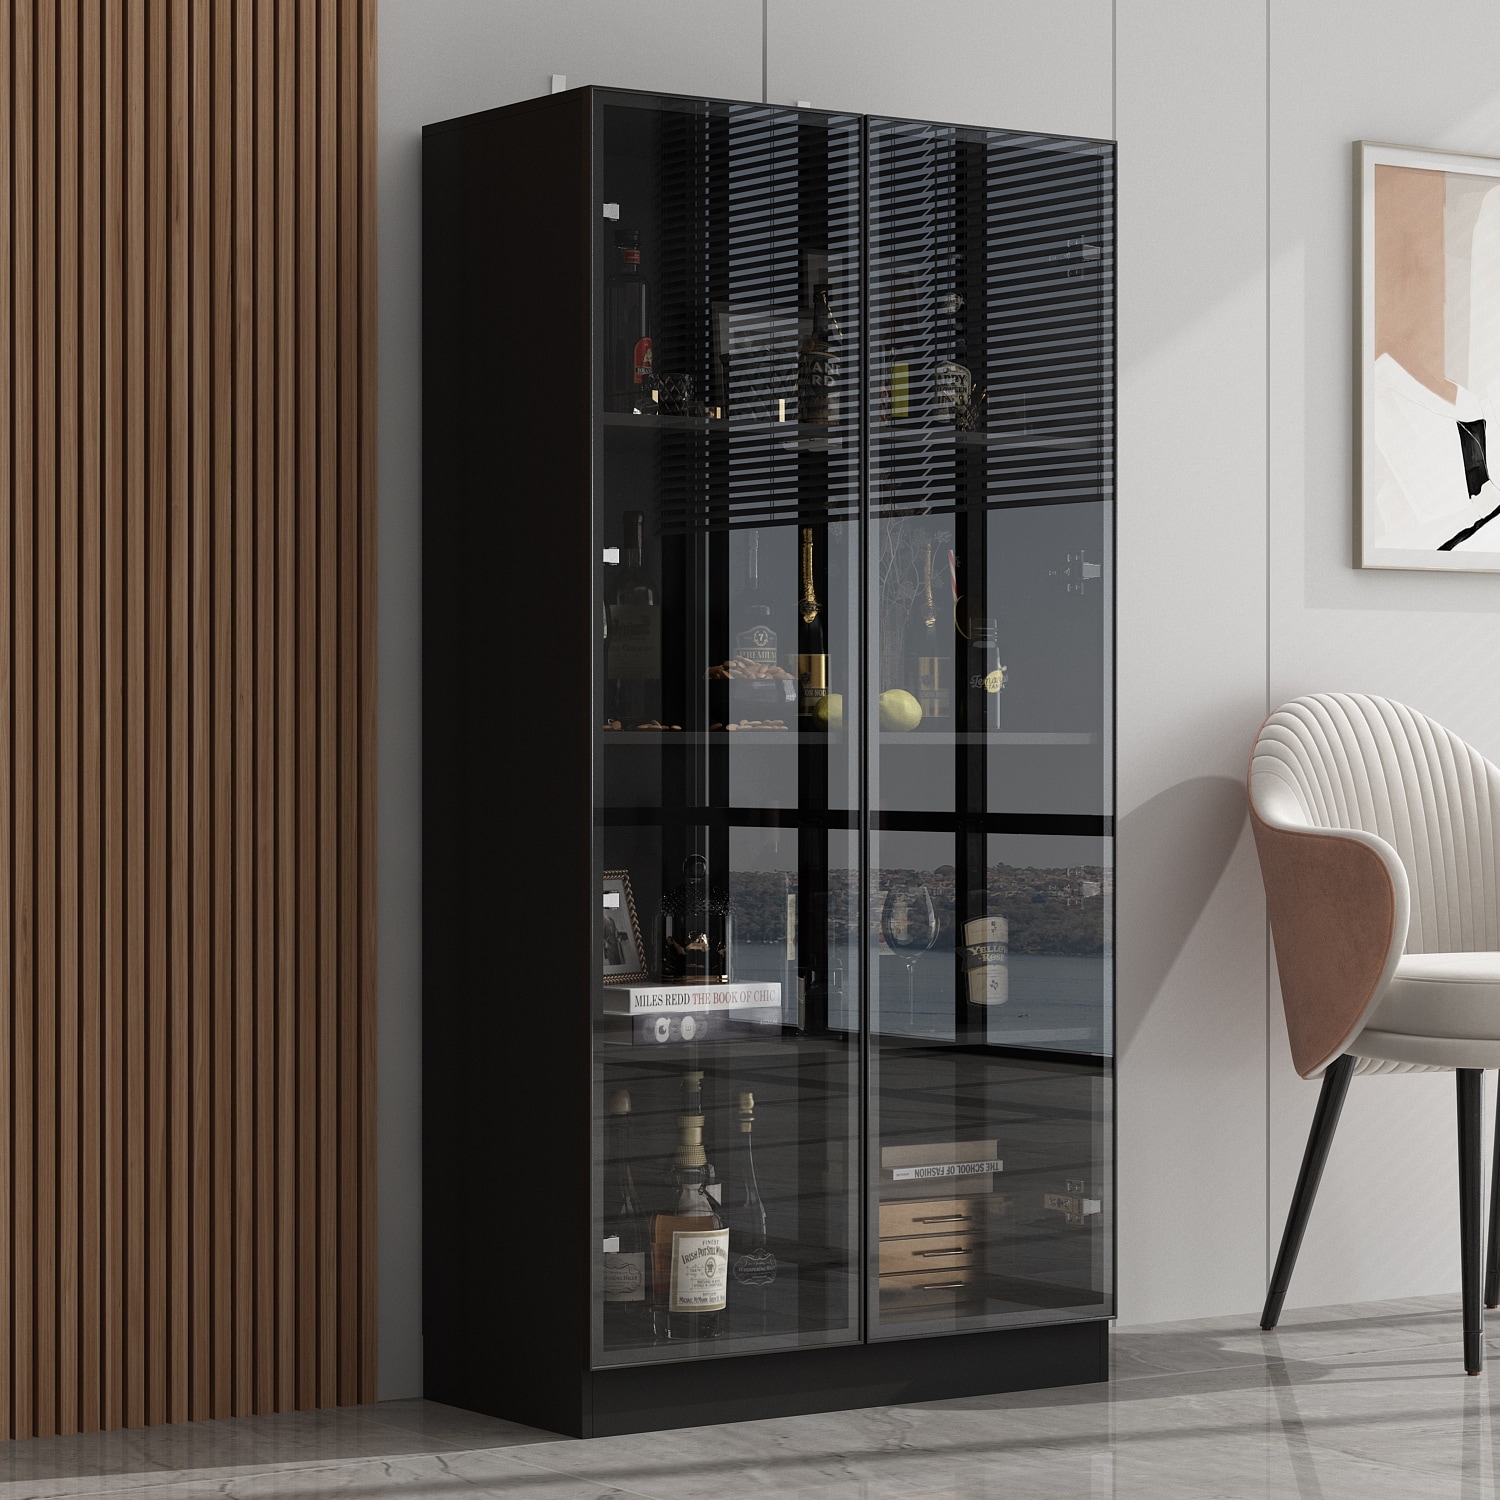 READING CABINET, Black Finish on Metal Frame with Clear Glass, 2 Door -  bookshelves